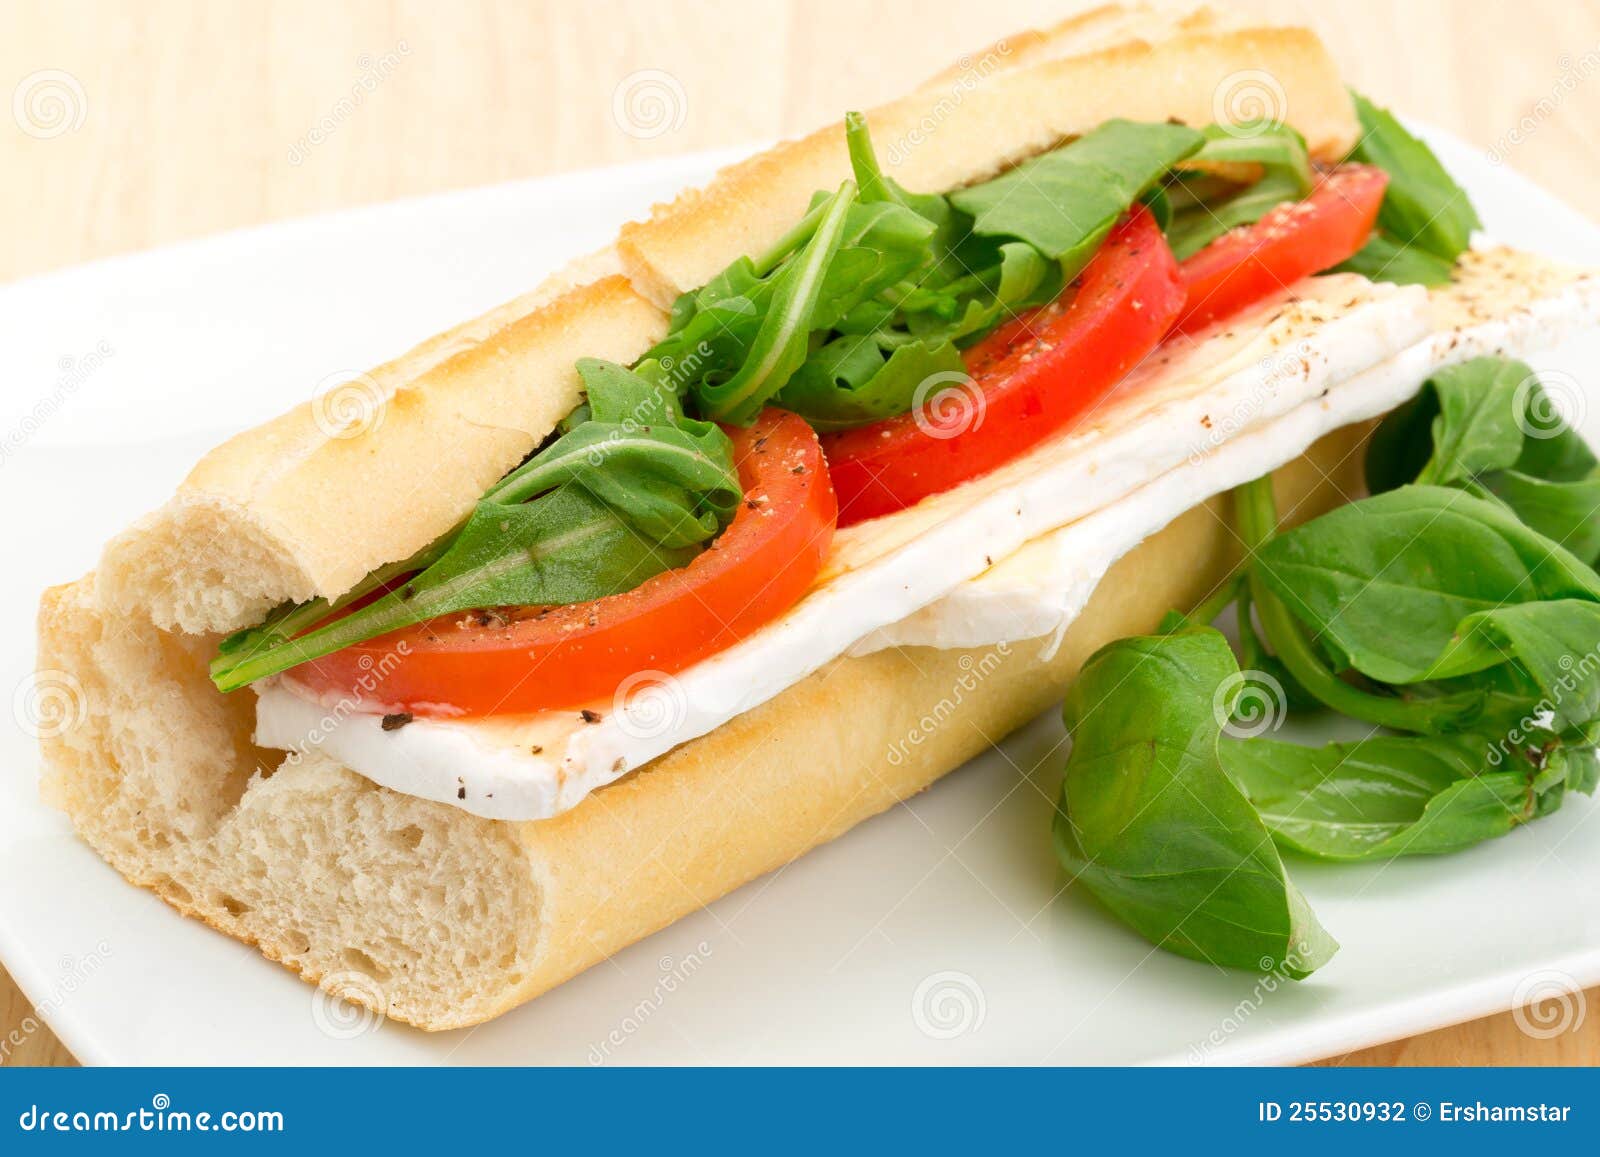 brie cheese and tomato sandwich